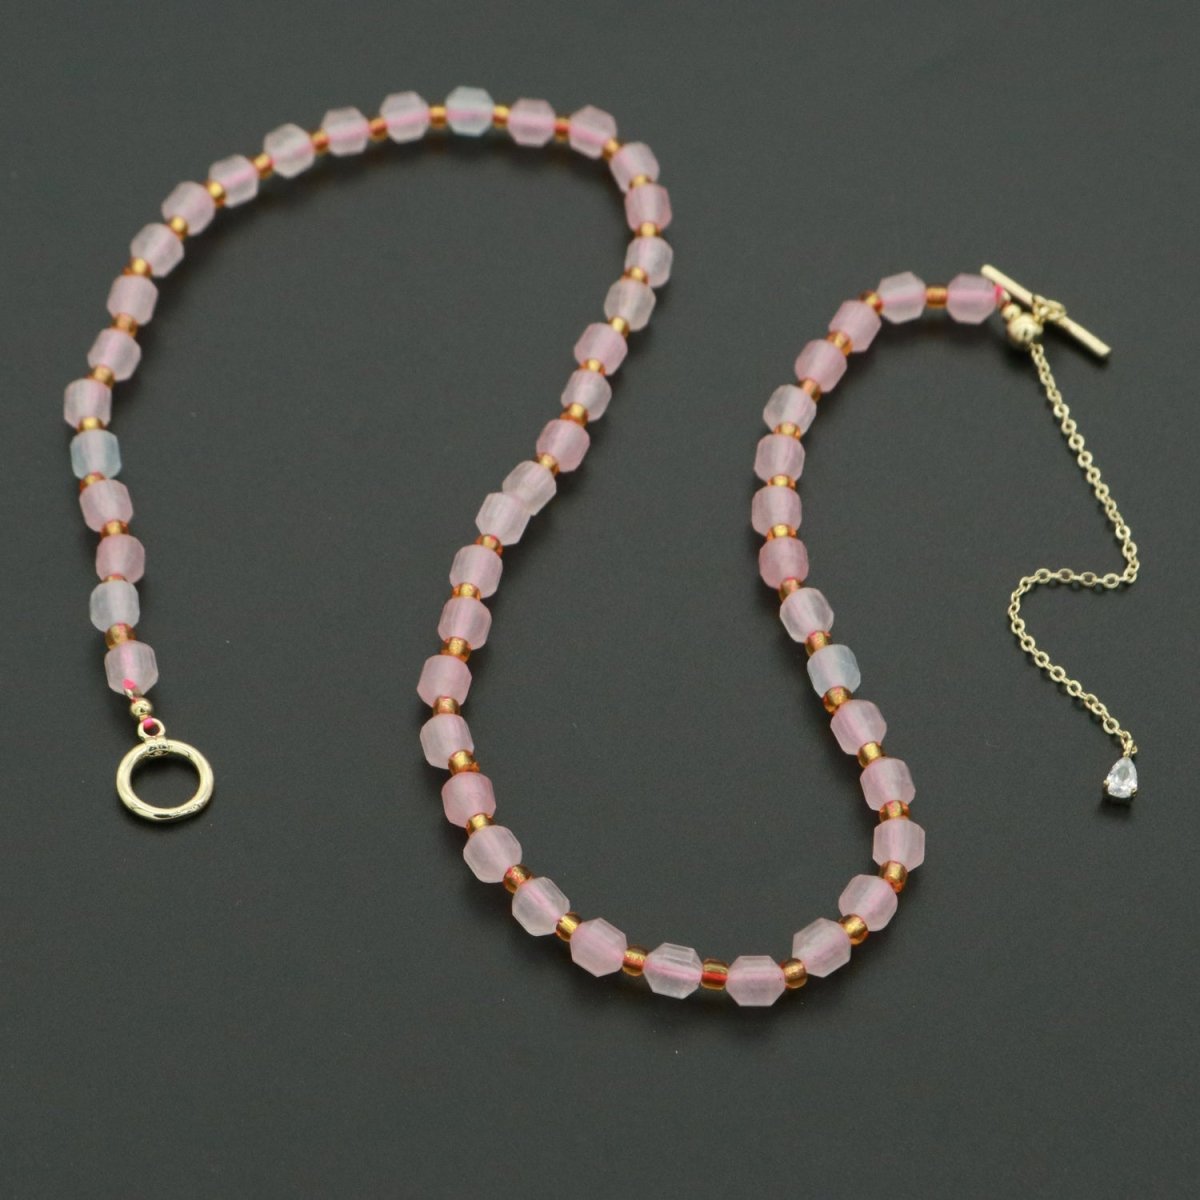 Pink Morganite Necklace 5.6mm Beads Mini Morganite stone Bead Necklace 16.5" necklace with Toggle Clasp | WA-255 Clearance Pricing - DLUXCA